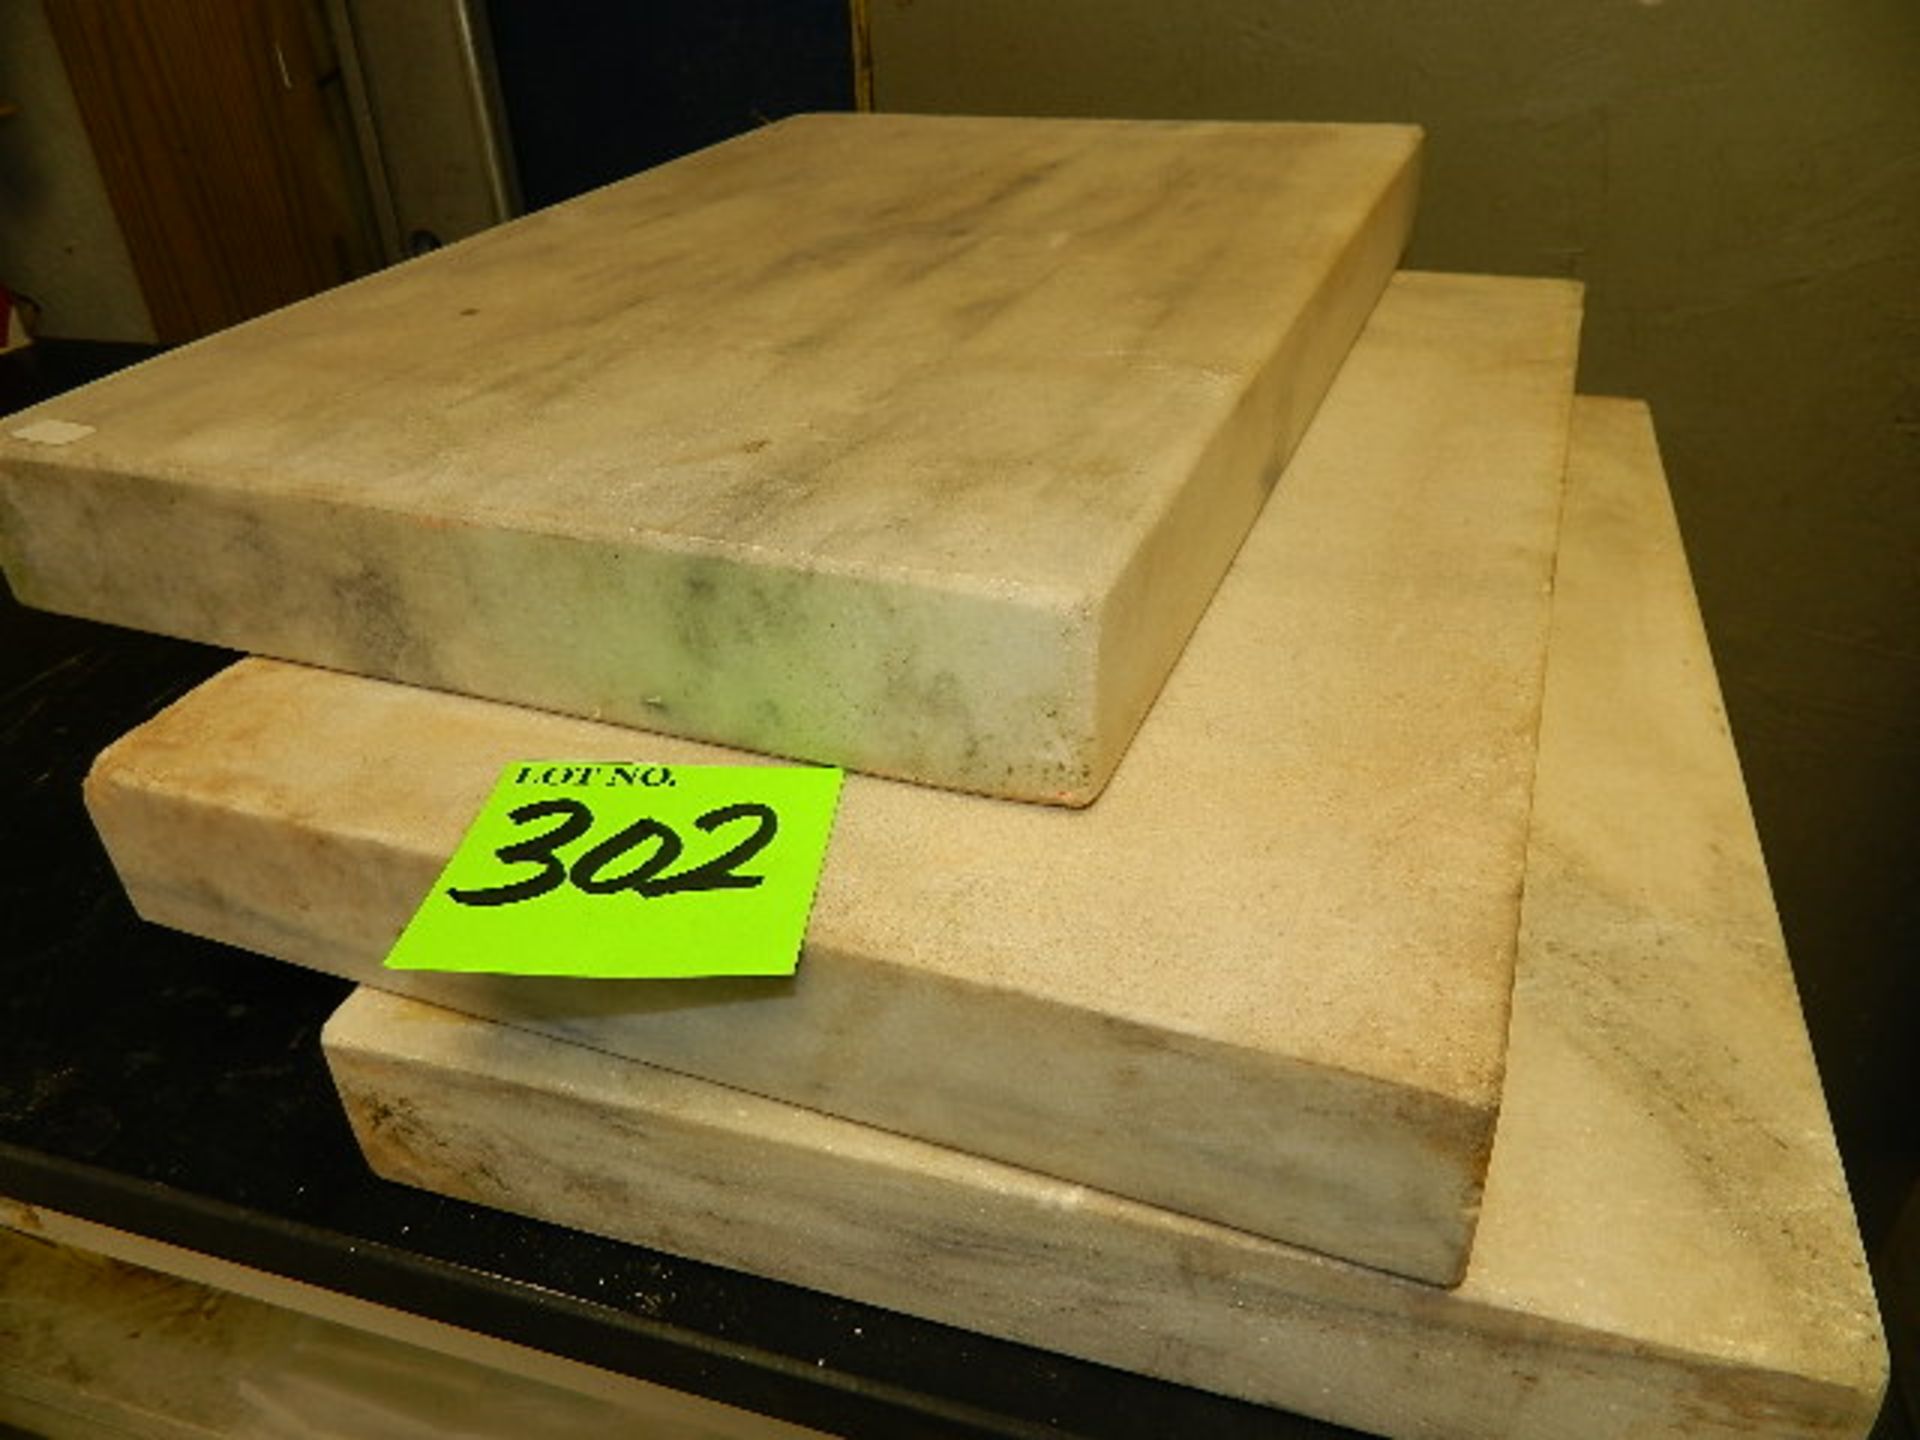 Granite/Marble Level Surface Plates 13 x 20 x 2 1/4" (Qty. 3) - Image 2 of 4